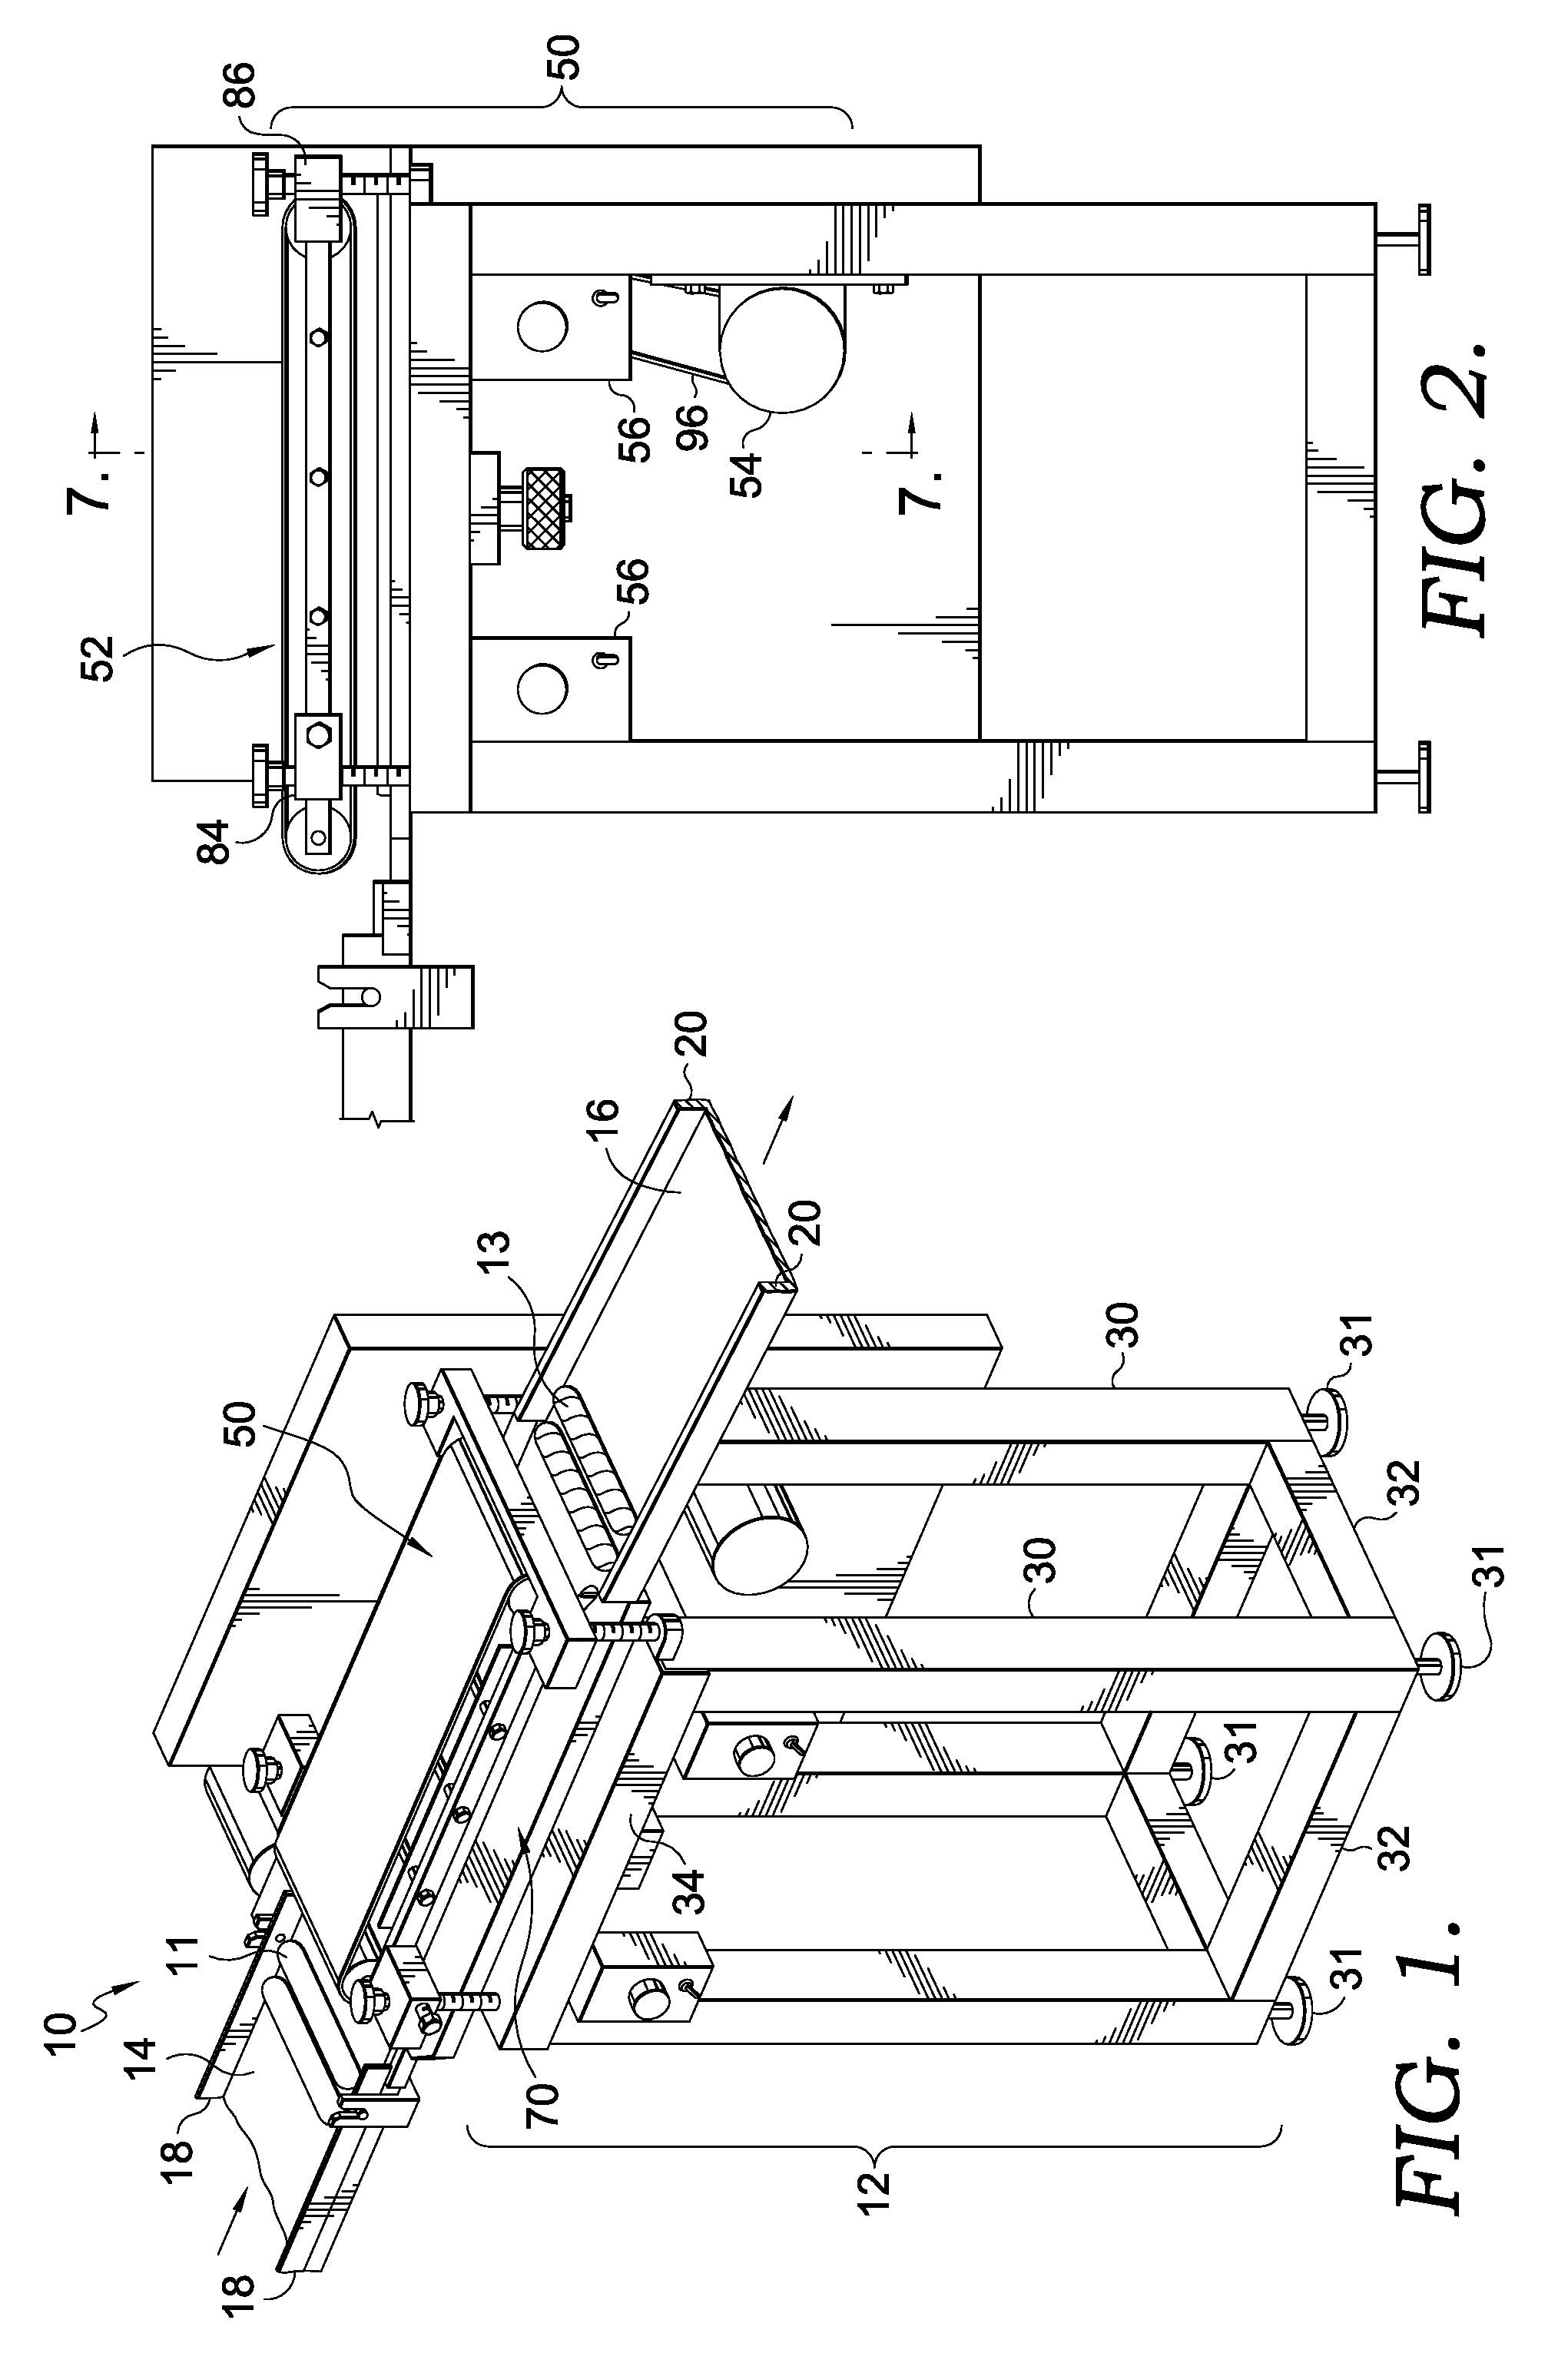 Device for making a spiral incision on a meat product